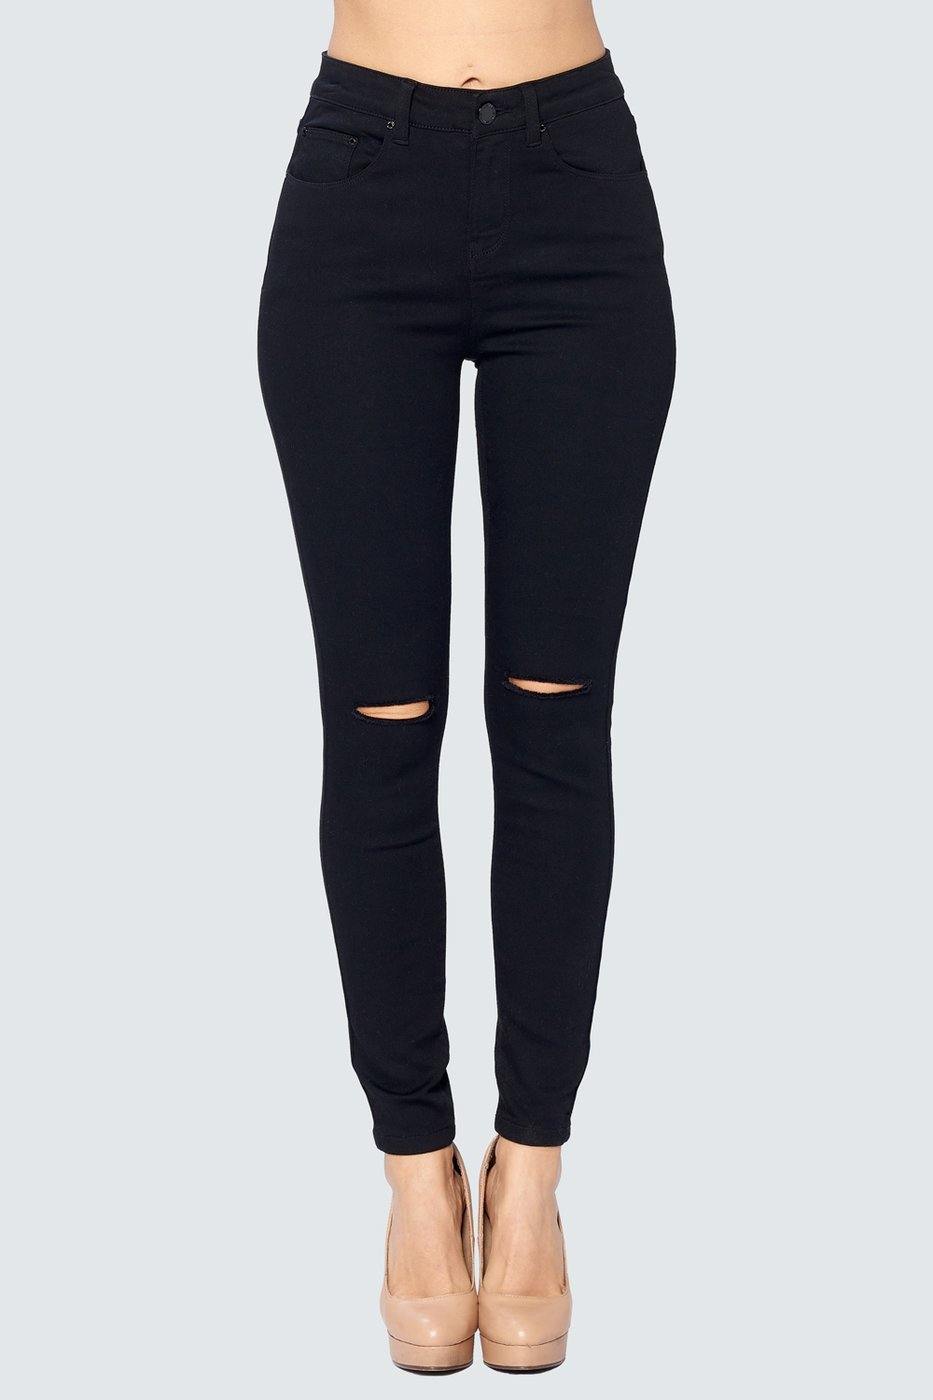 Black High Waisted Jeans - She's Bae Boutique